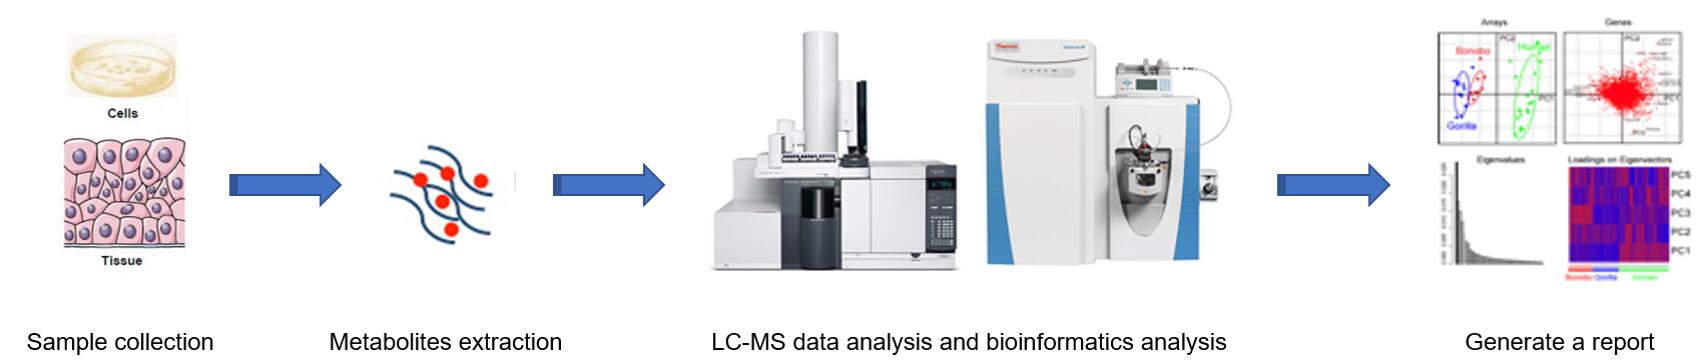 Workflow of common Glycosphingolipids analysis in various type of animal samples.